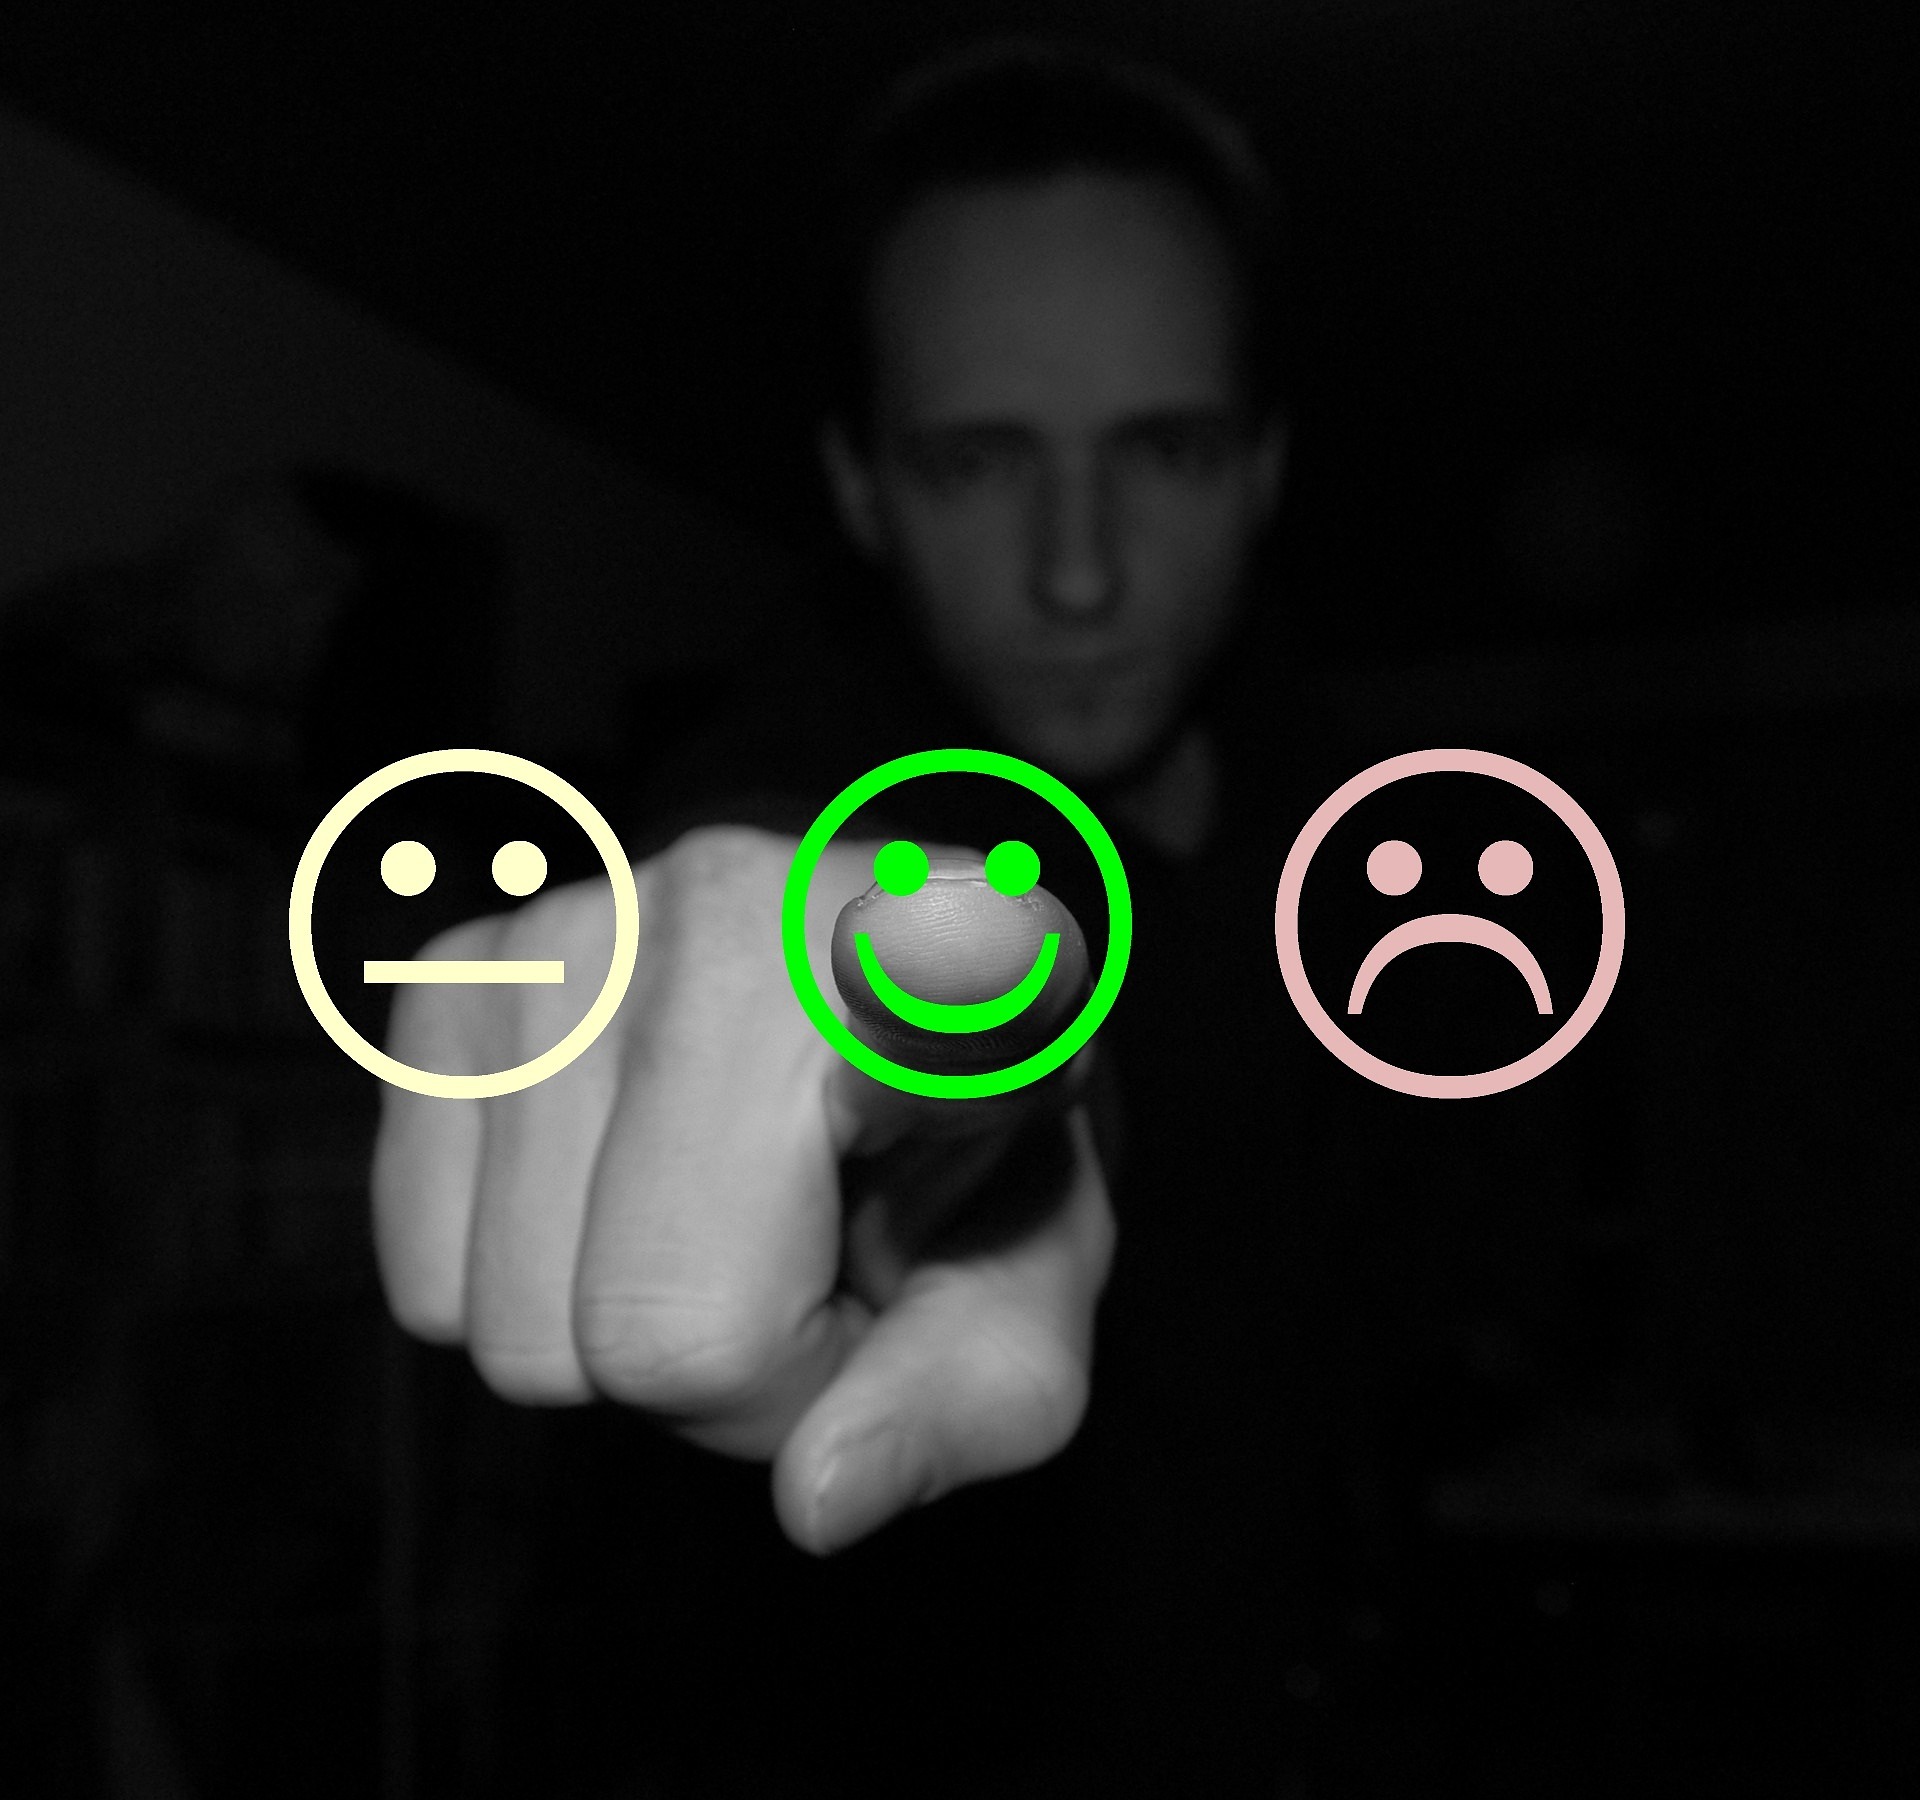 How to Ensure More Customers Leave Reviews? 7 Powerful Tips